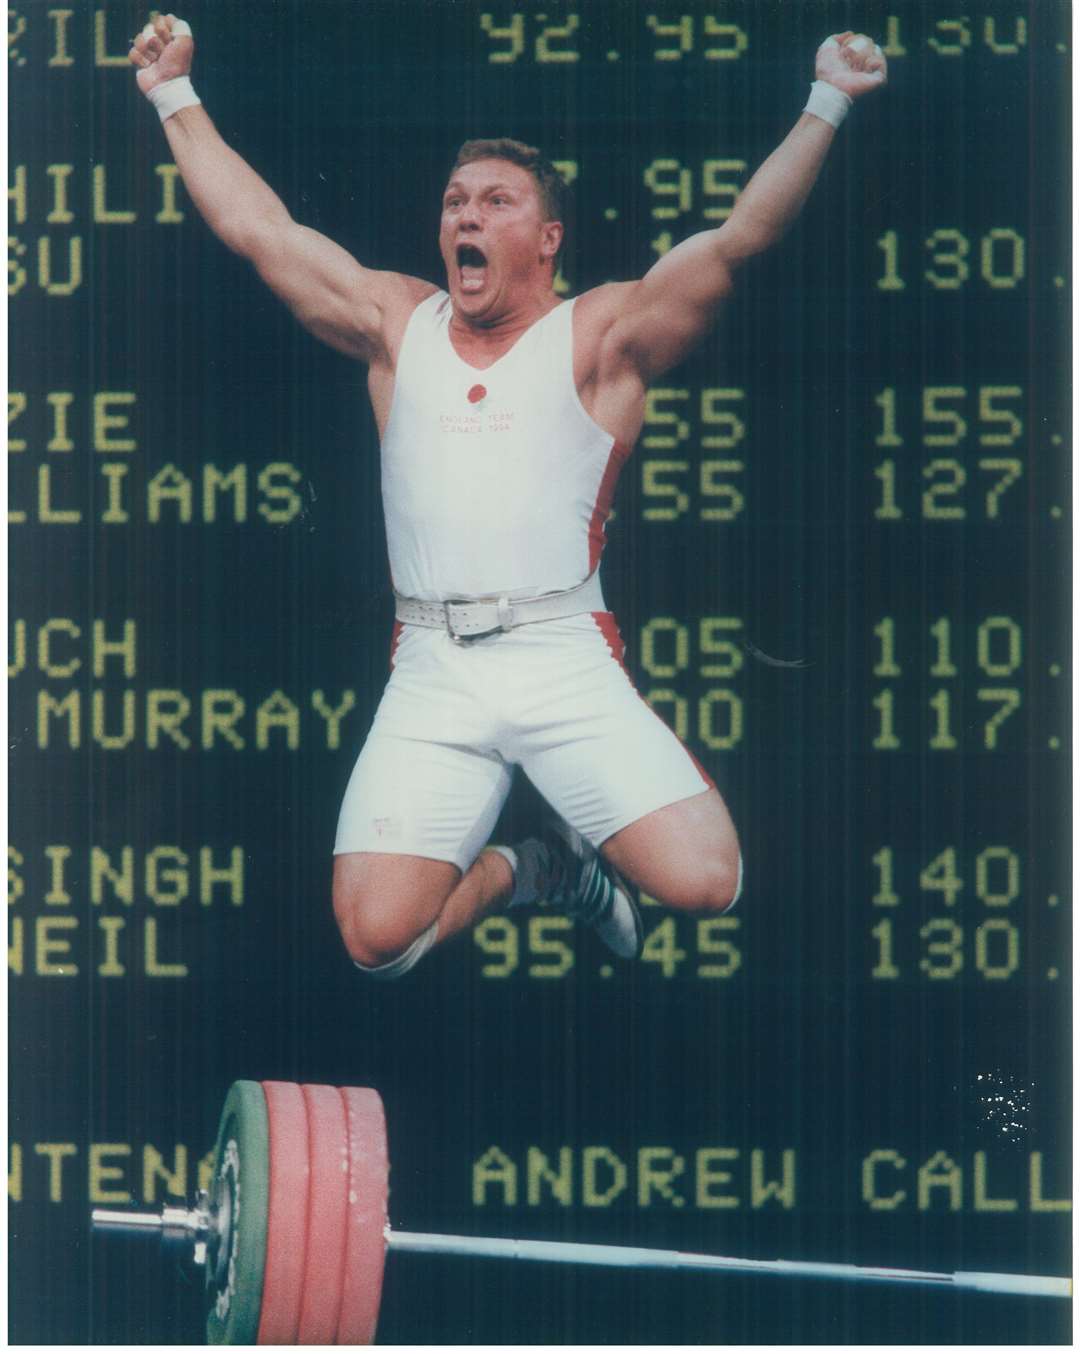 Andrew Callard celebrating a winning lift at the 1994 Commonwealth Games held in Canada